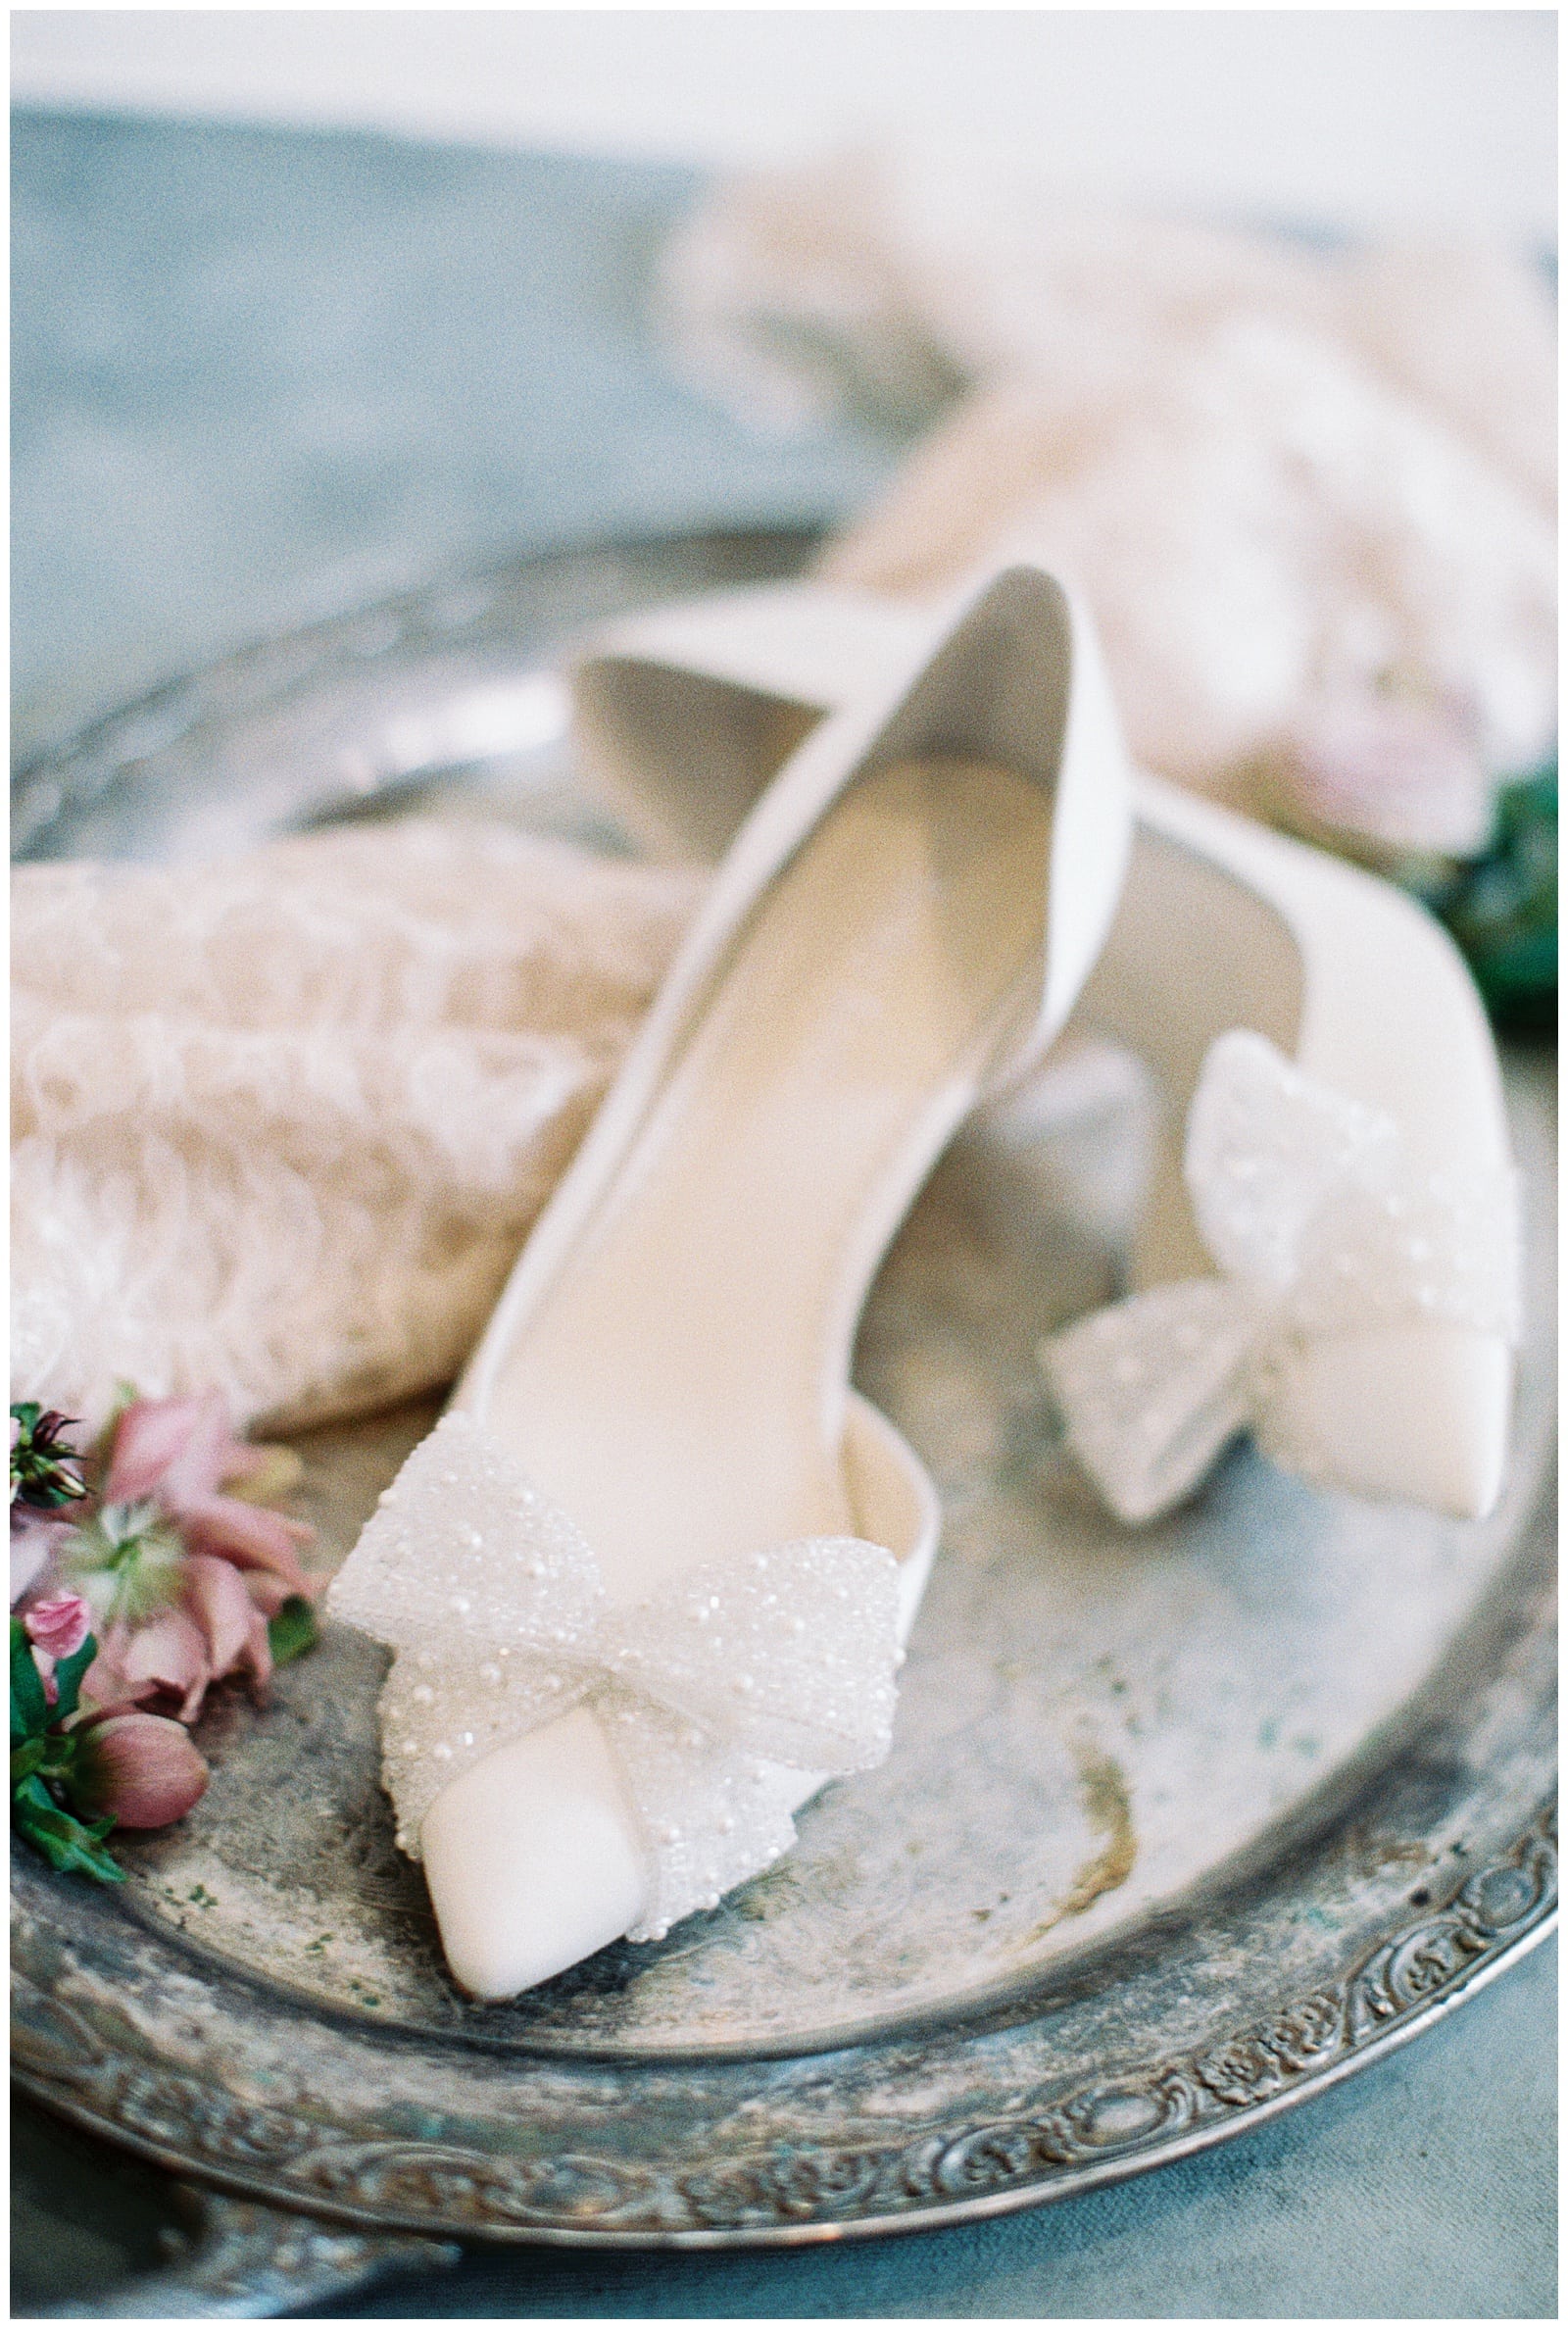 24 Best Wedding Shoes For Every Bridal Style